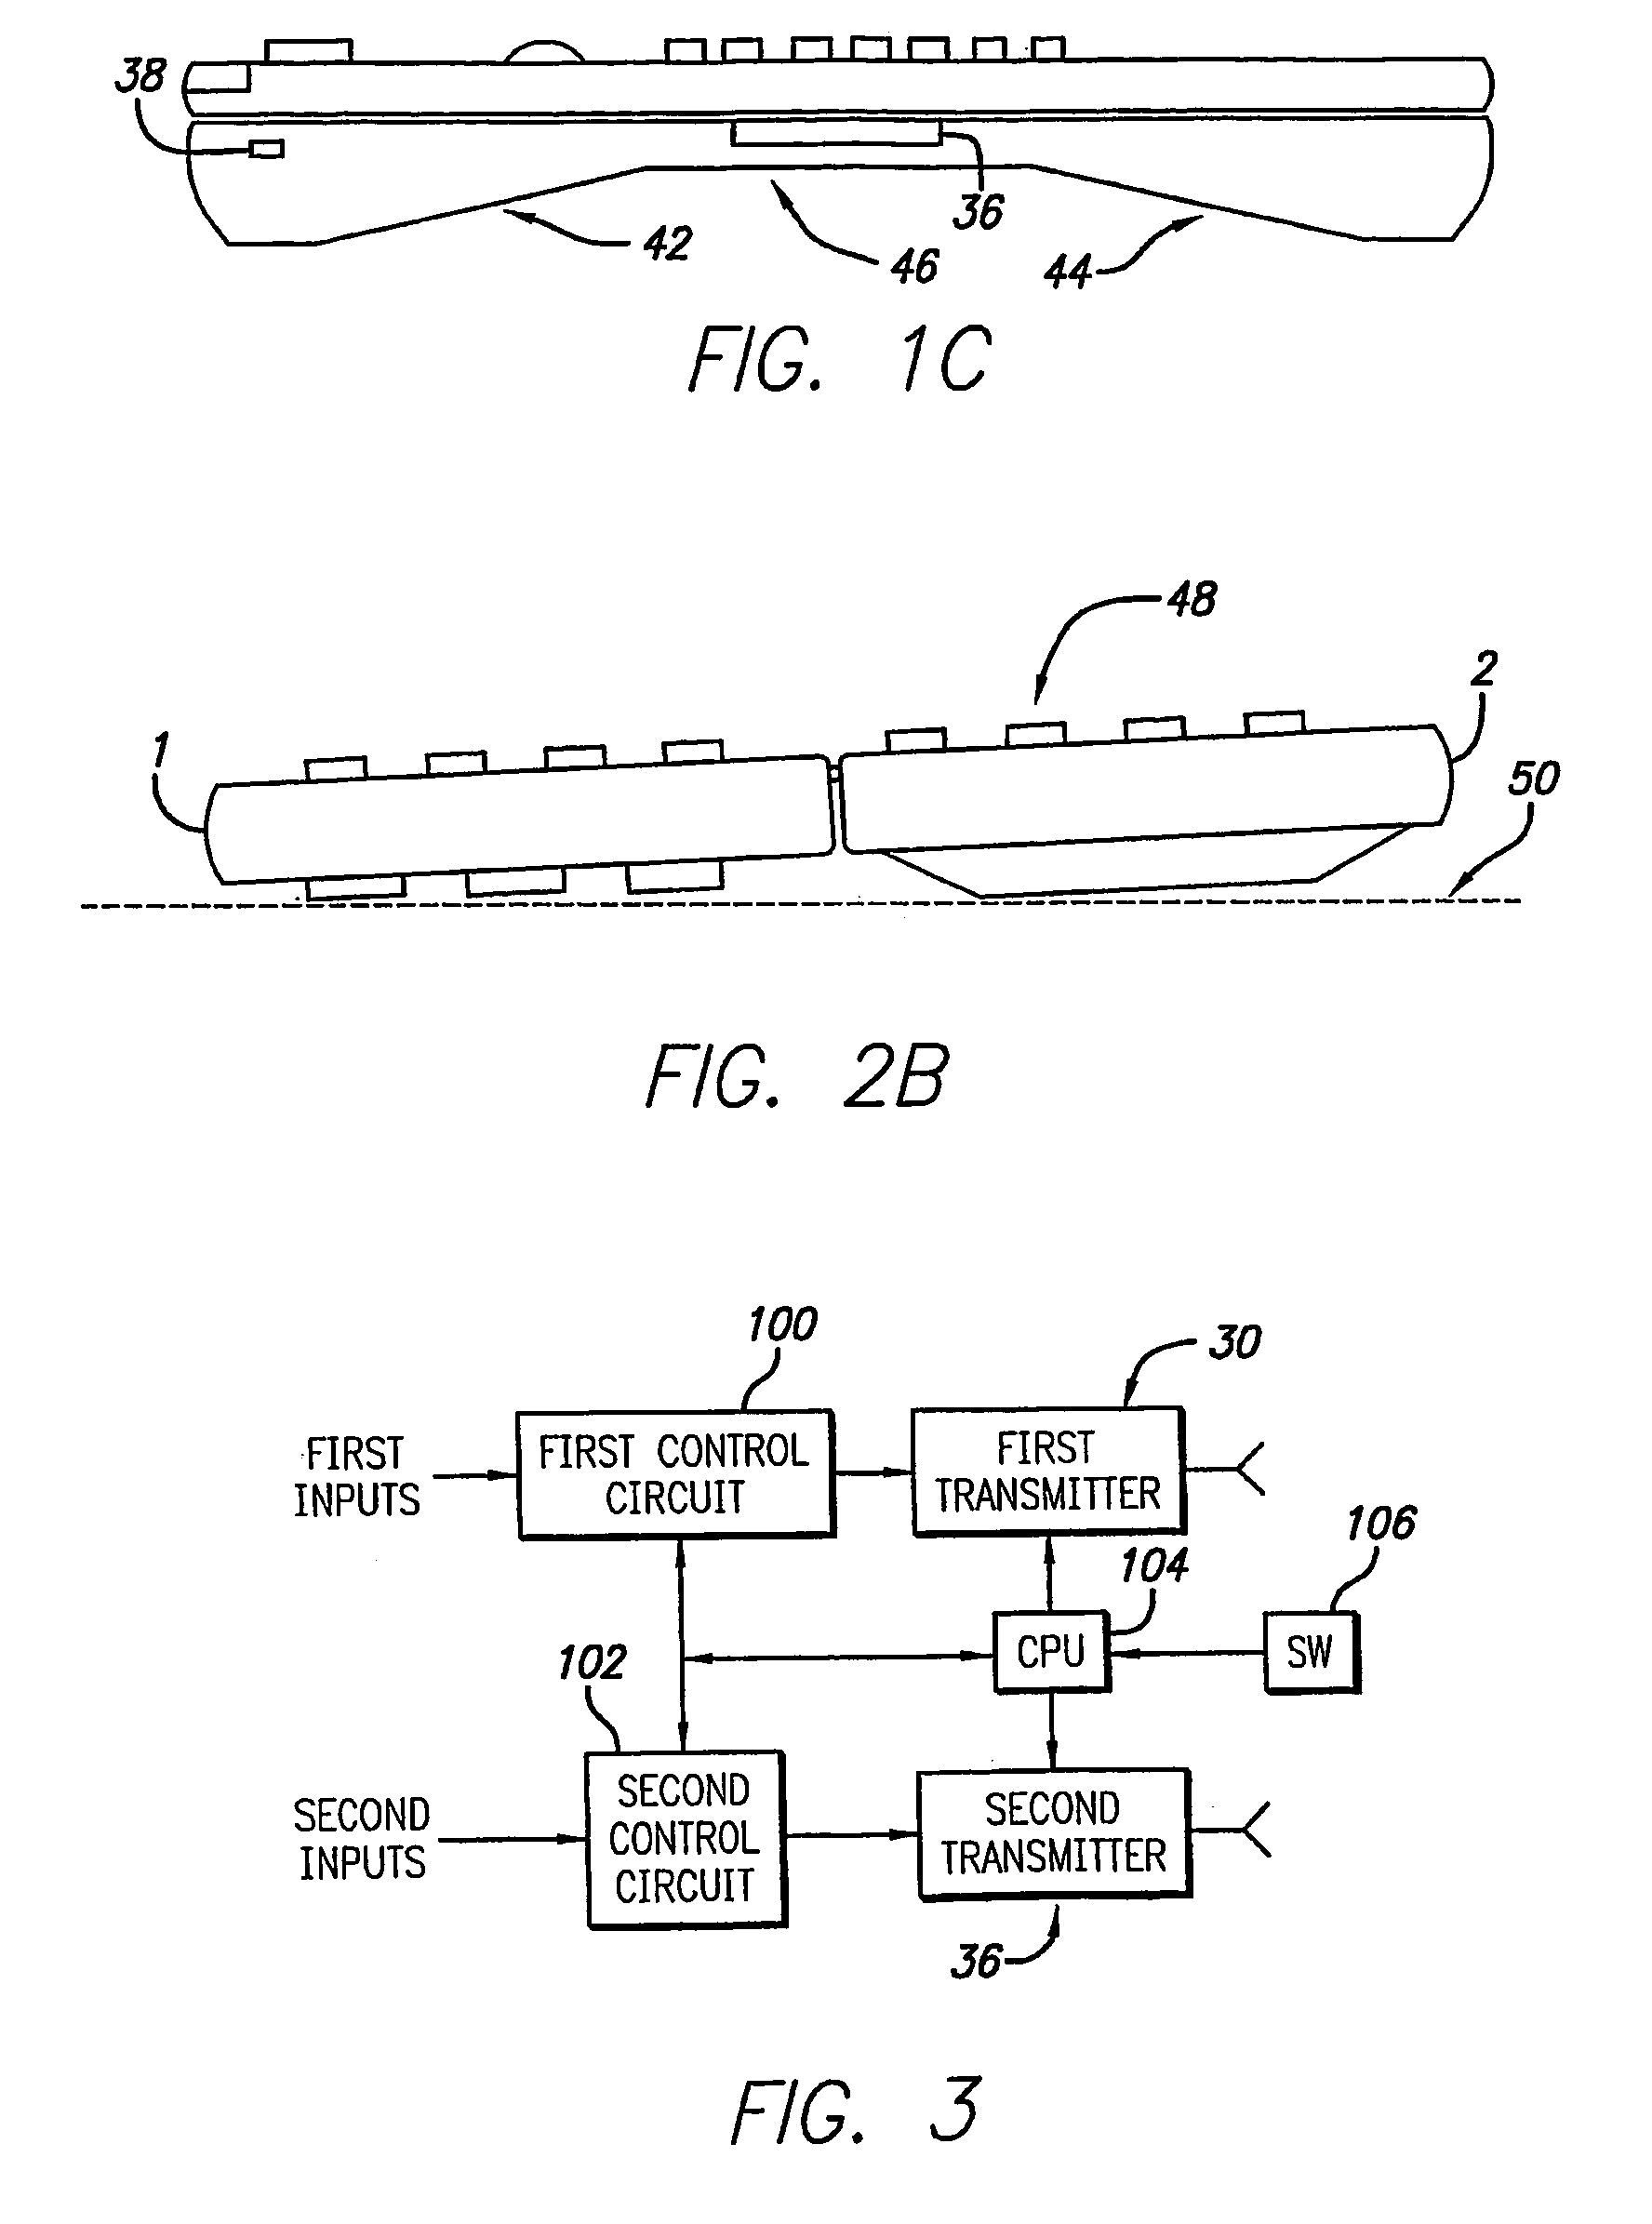 Remote control method using remote control device with keyboard